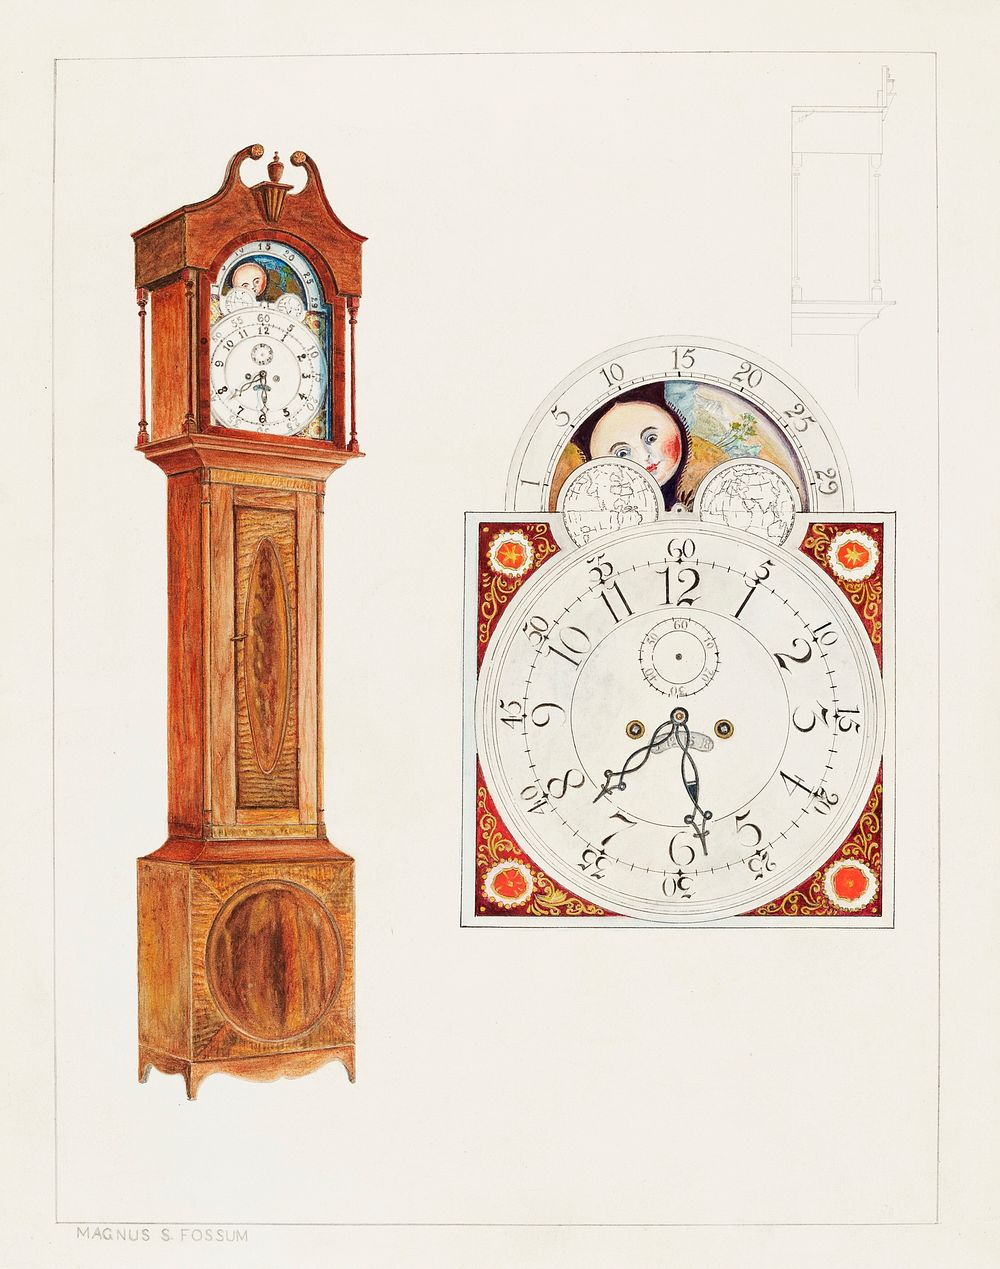 Grandfather Clock (ca.1937) by Magnus S. Fossum. Original from The National Gallery of Art. Digitally enhanced by rawpixel.